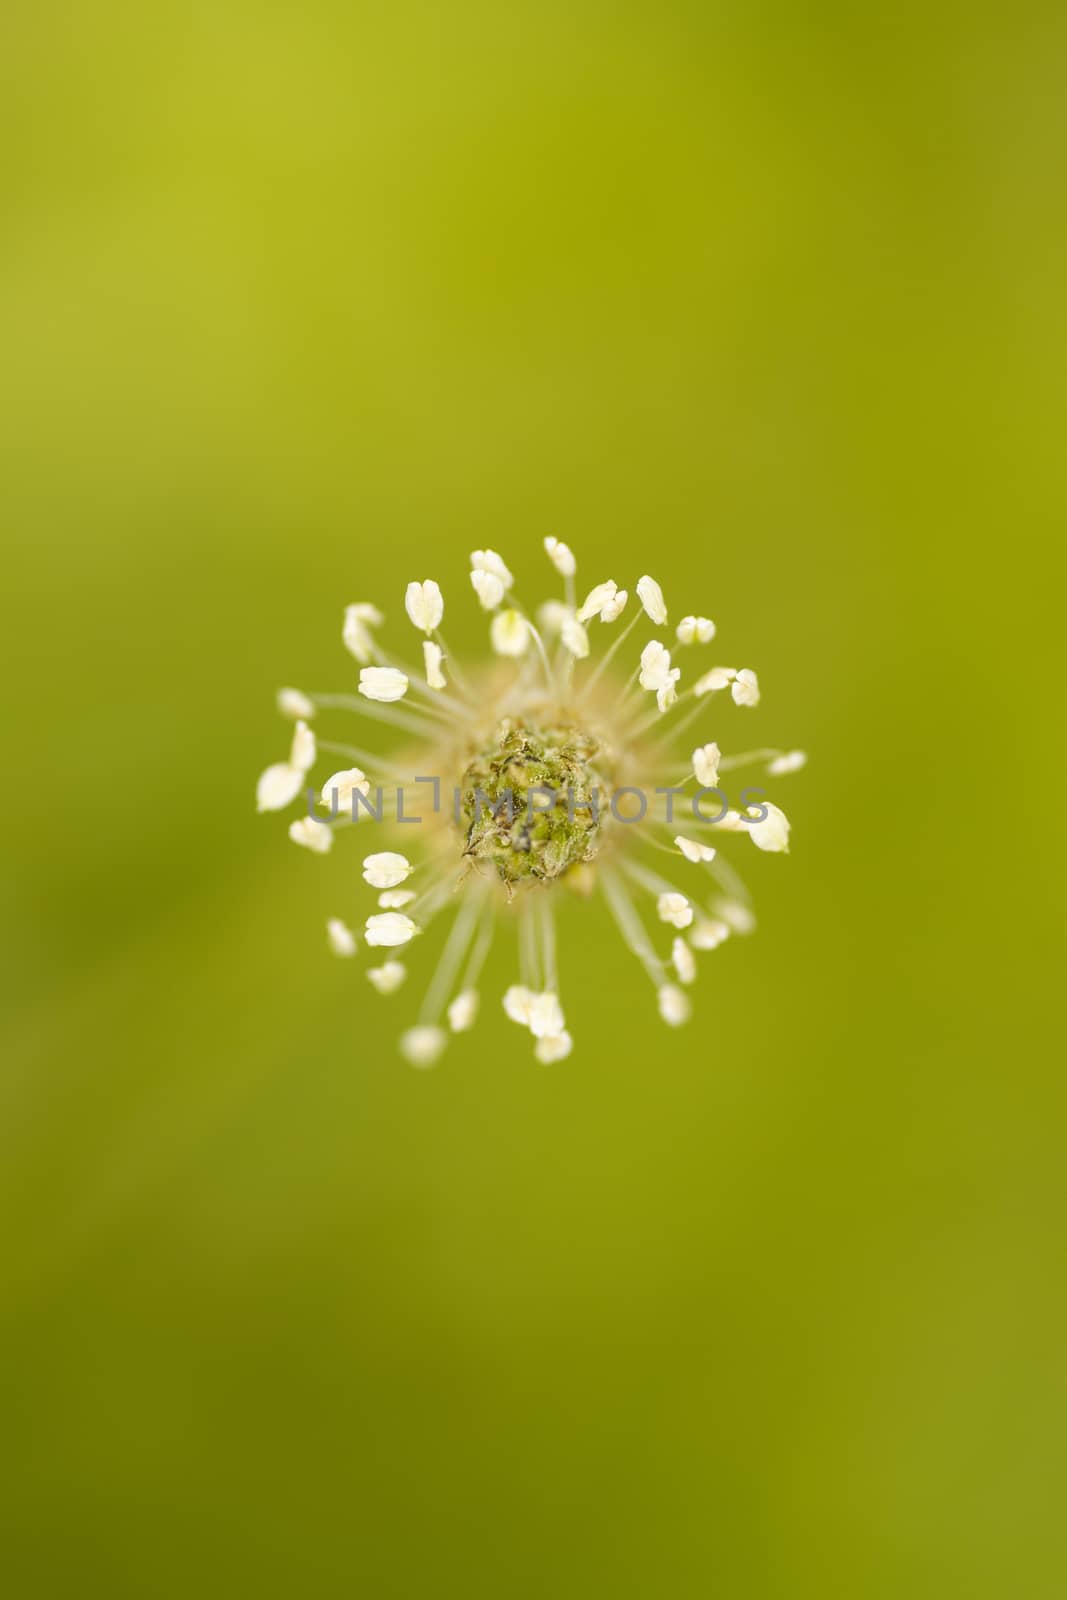 White wildflower on fully blurred green background.